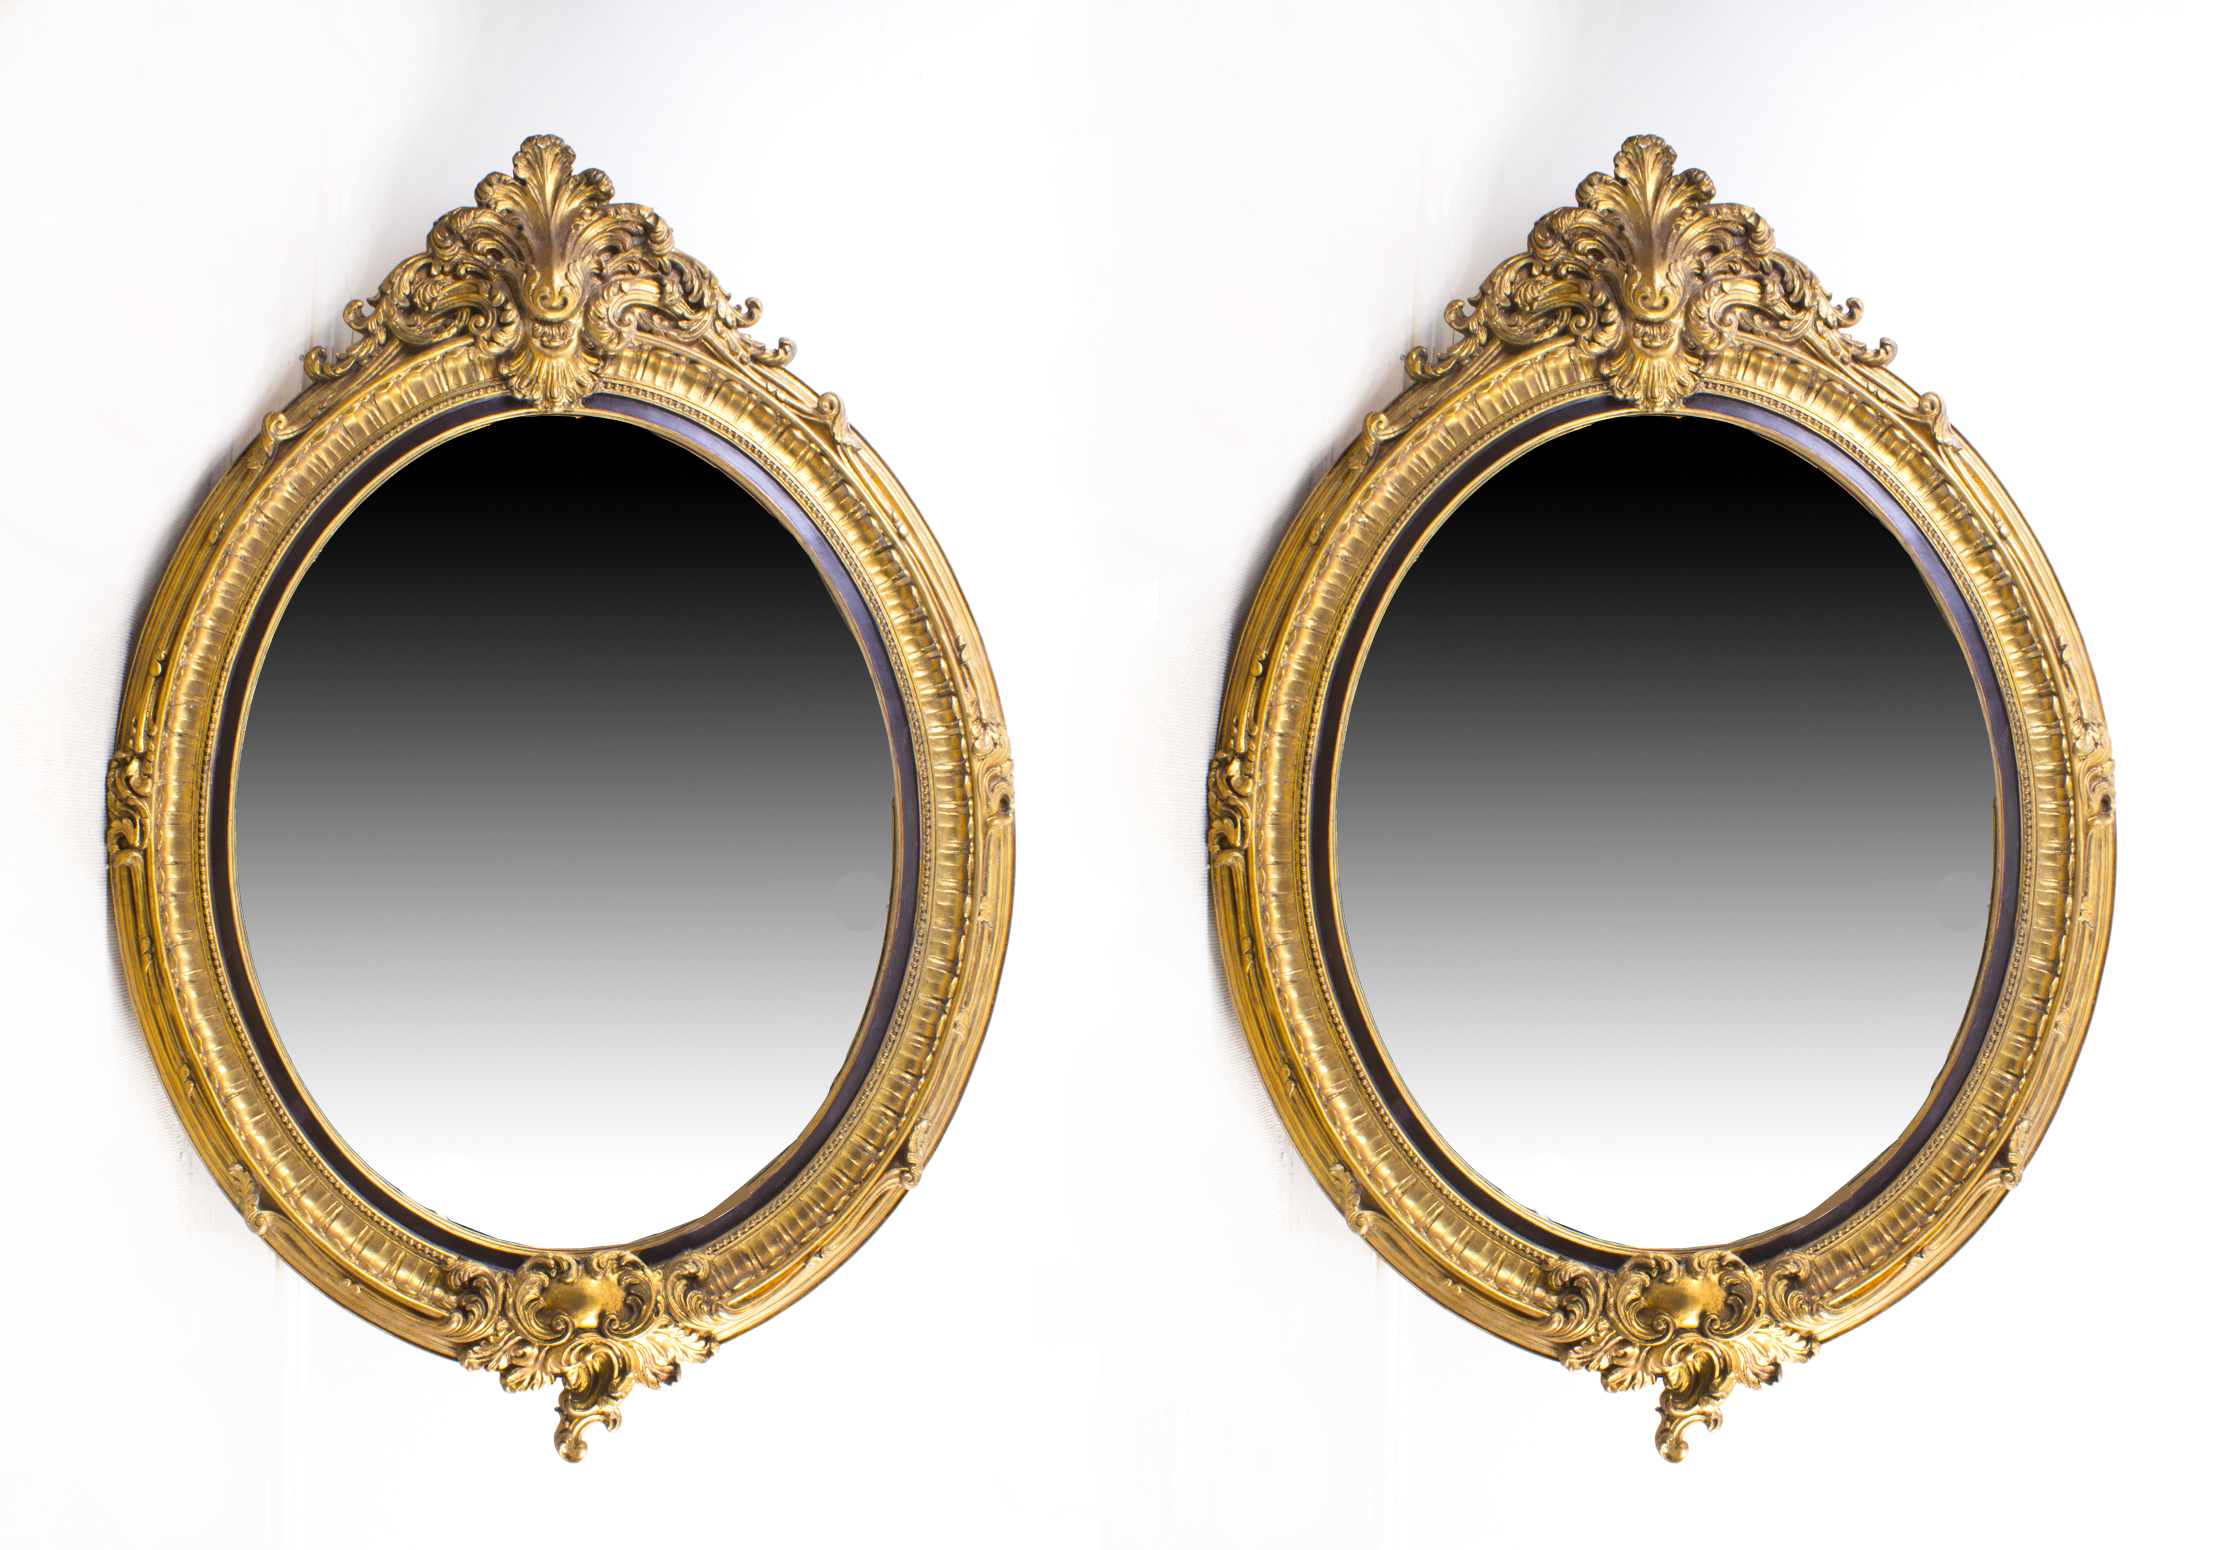 Pair Beautiful Large Rococo Style Gilded Oval Mirrors 150 x 103 cm  Ref. no. 07787a